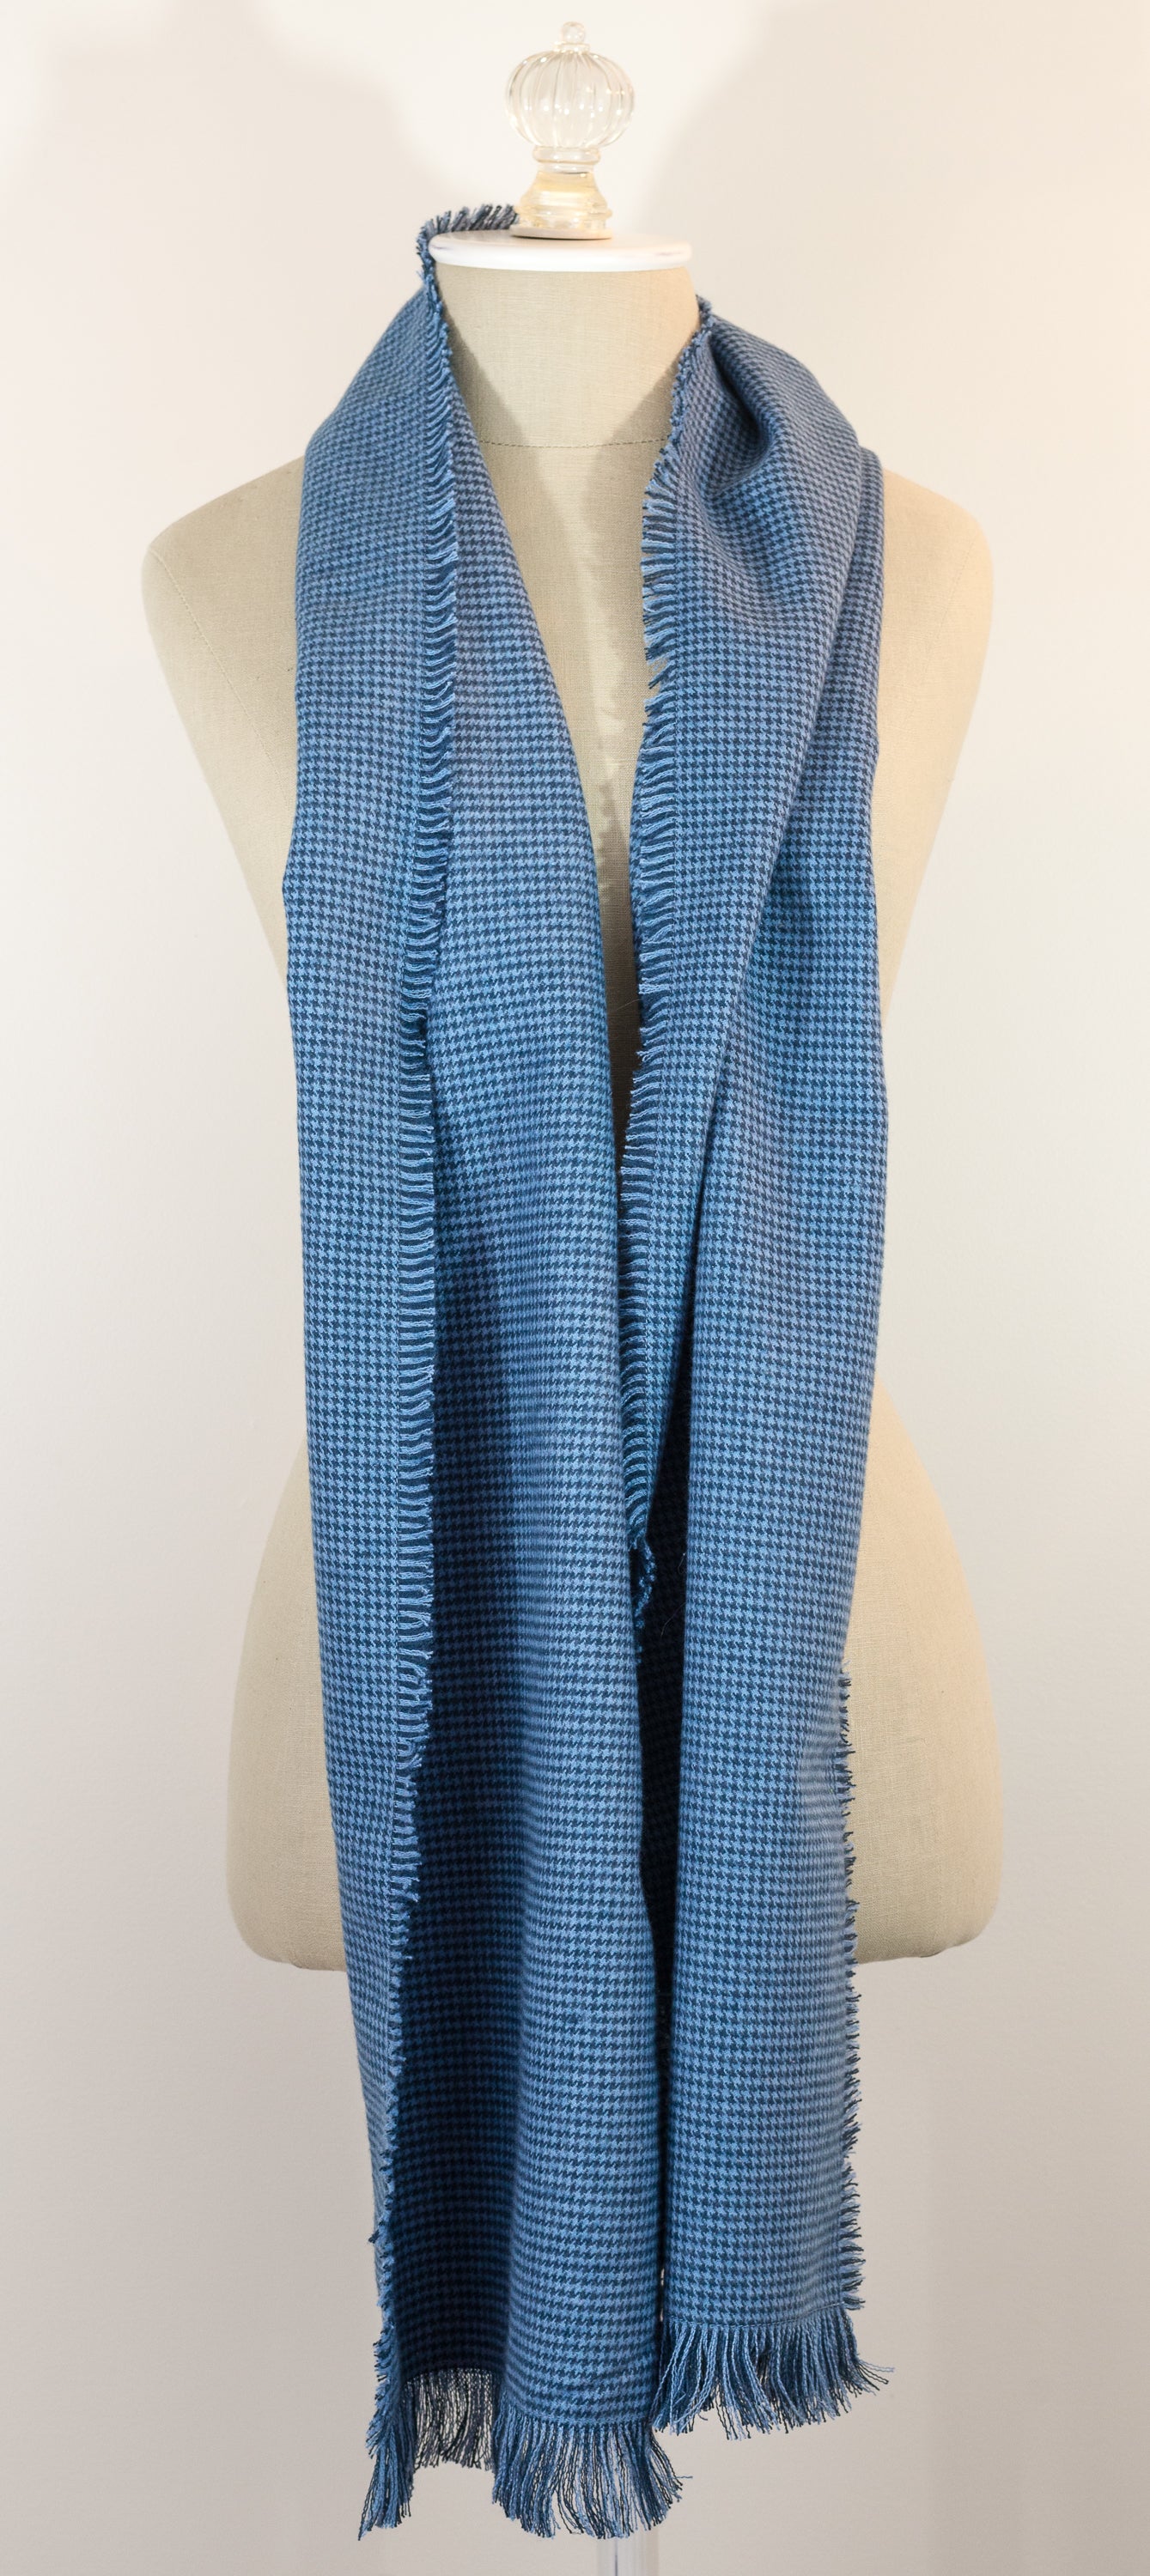 Blue Houndstooth Flannel Scarf 11" x 72"